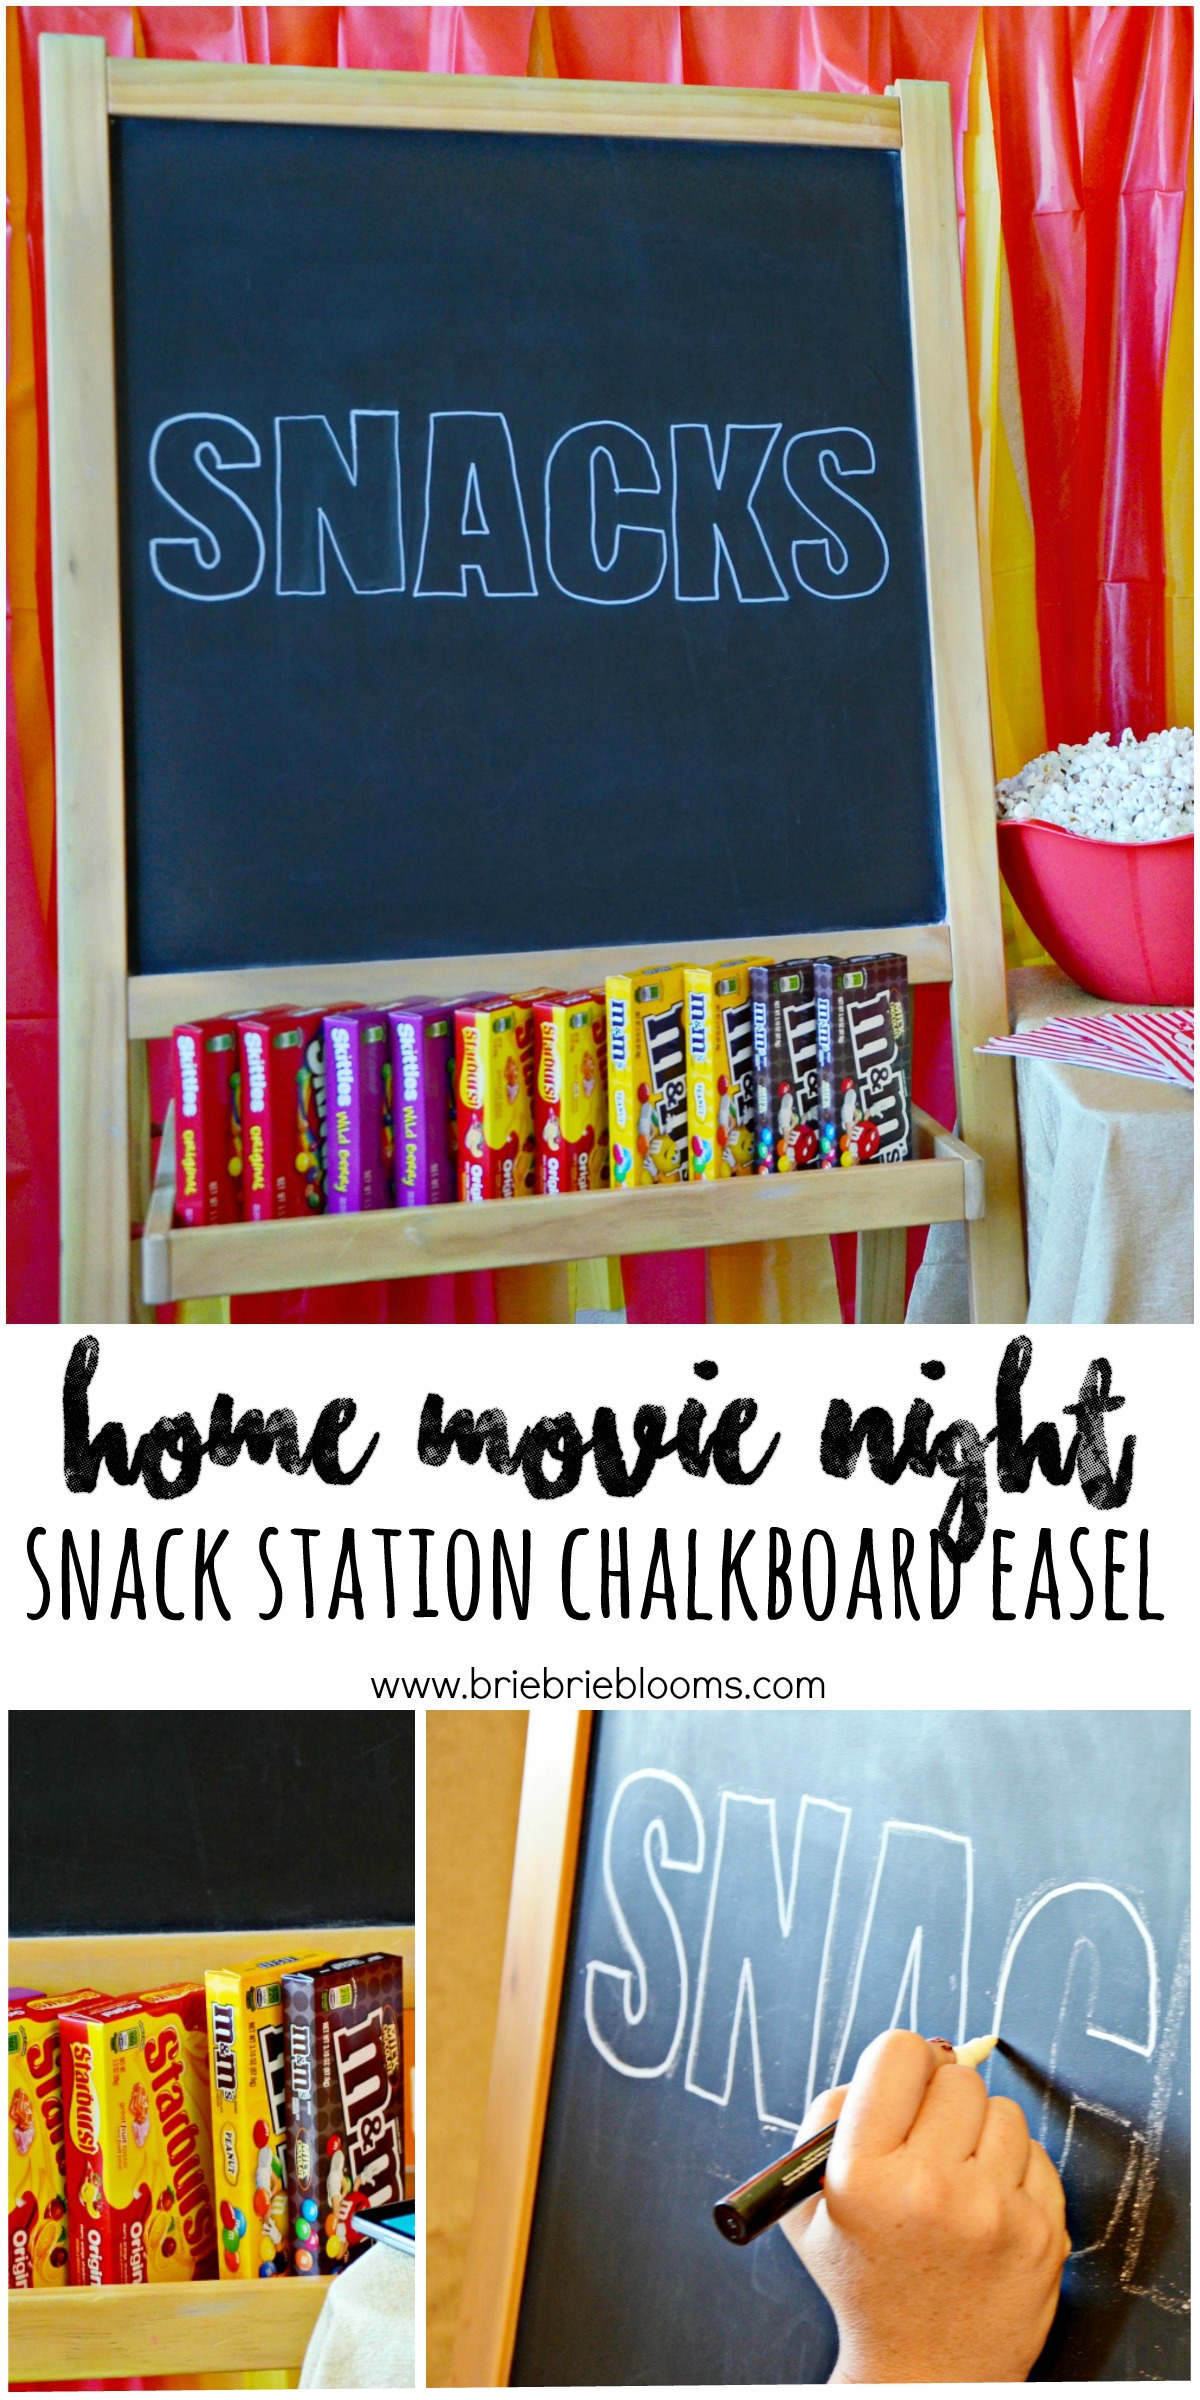 Make this easy snack station chalkboard easel for movie nights and more family fun at home. 